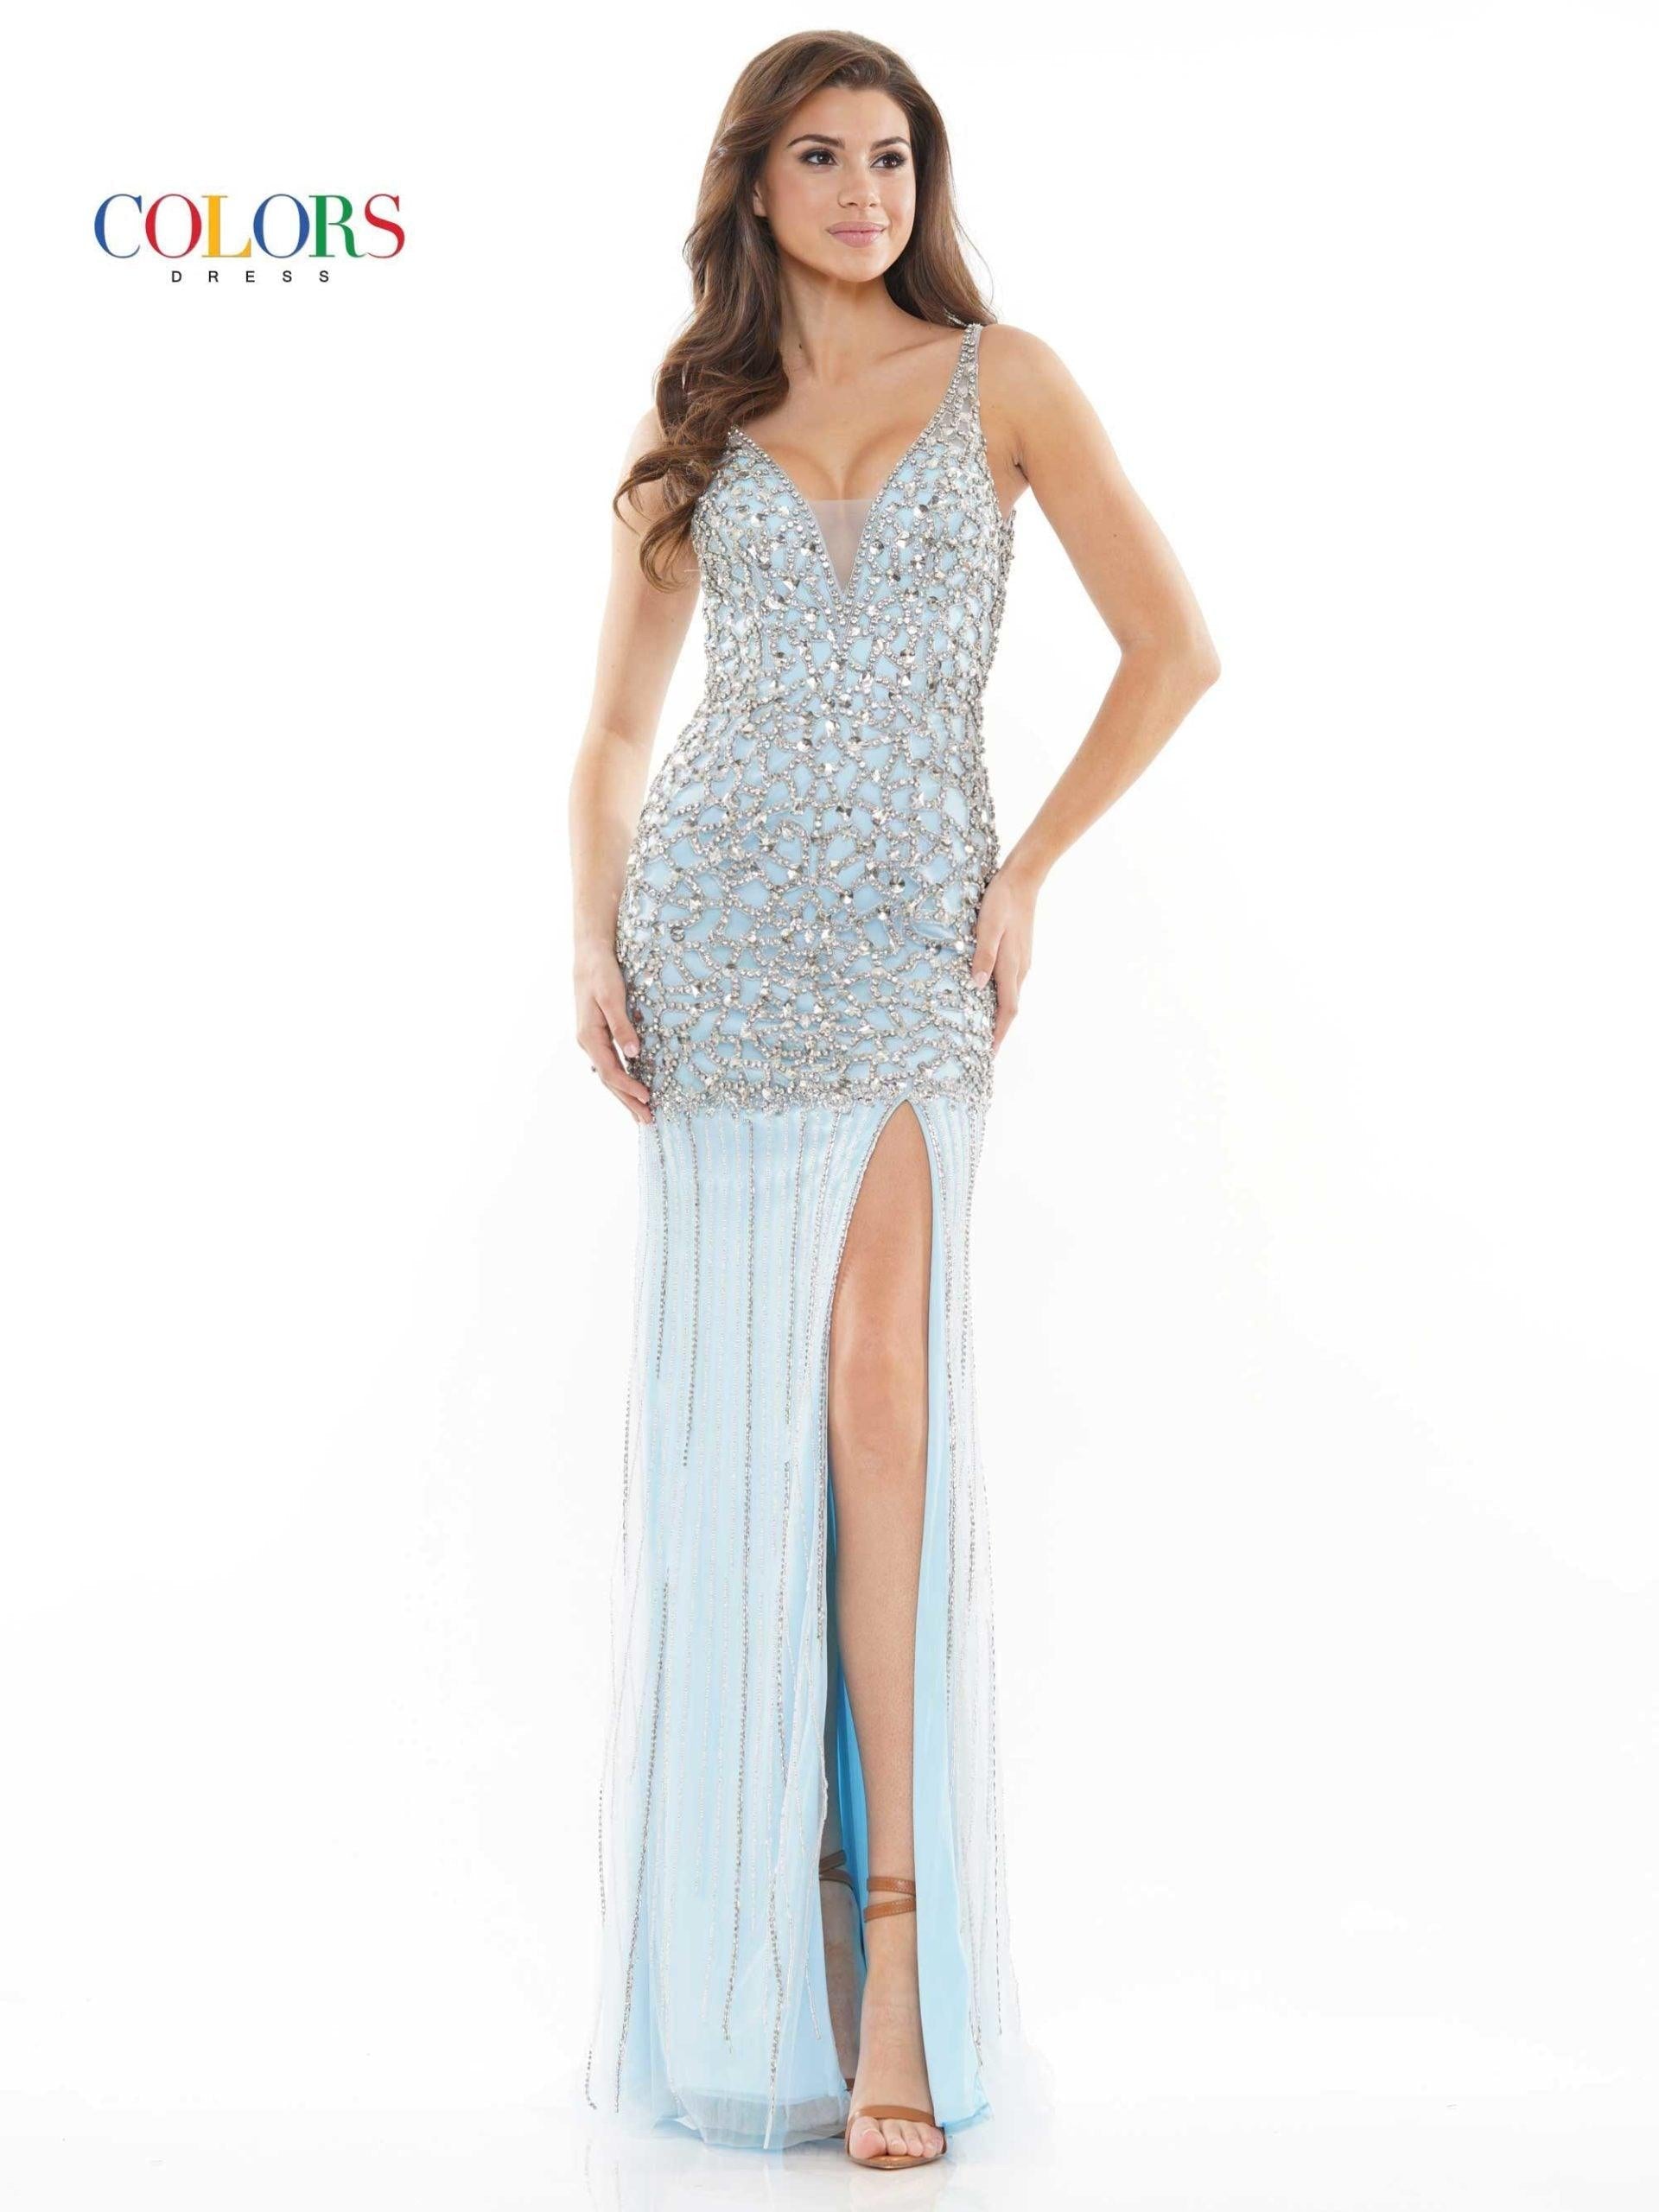 Colors Long Sleeveless Formal Prom Dress 2676 - The Dress Outlet